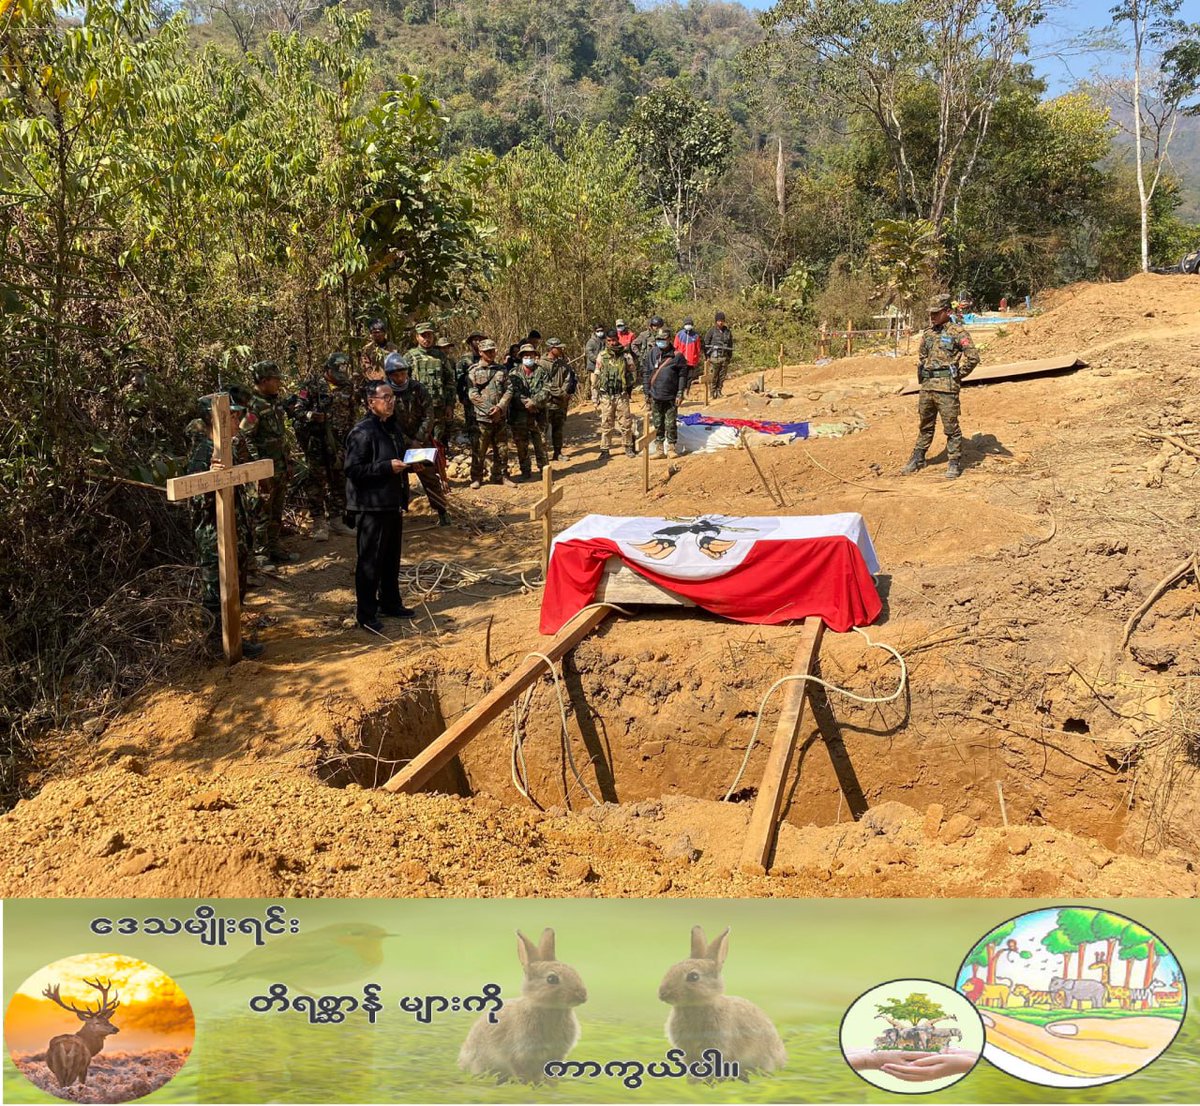 The terrorist military council bombed #Htantalang city Chin state more than 15 times on today & killed 2 revolutionary comrades.
t.me/zalenmedia/8168
#2023Feb25Coup
#VillagesBurntDownByJunta 
#WhatsHappeninglnMyanmar